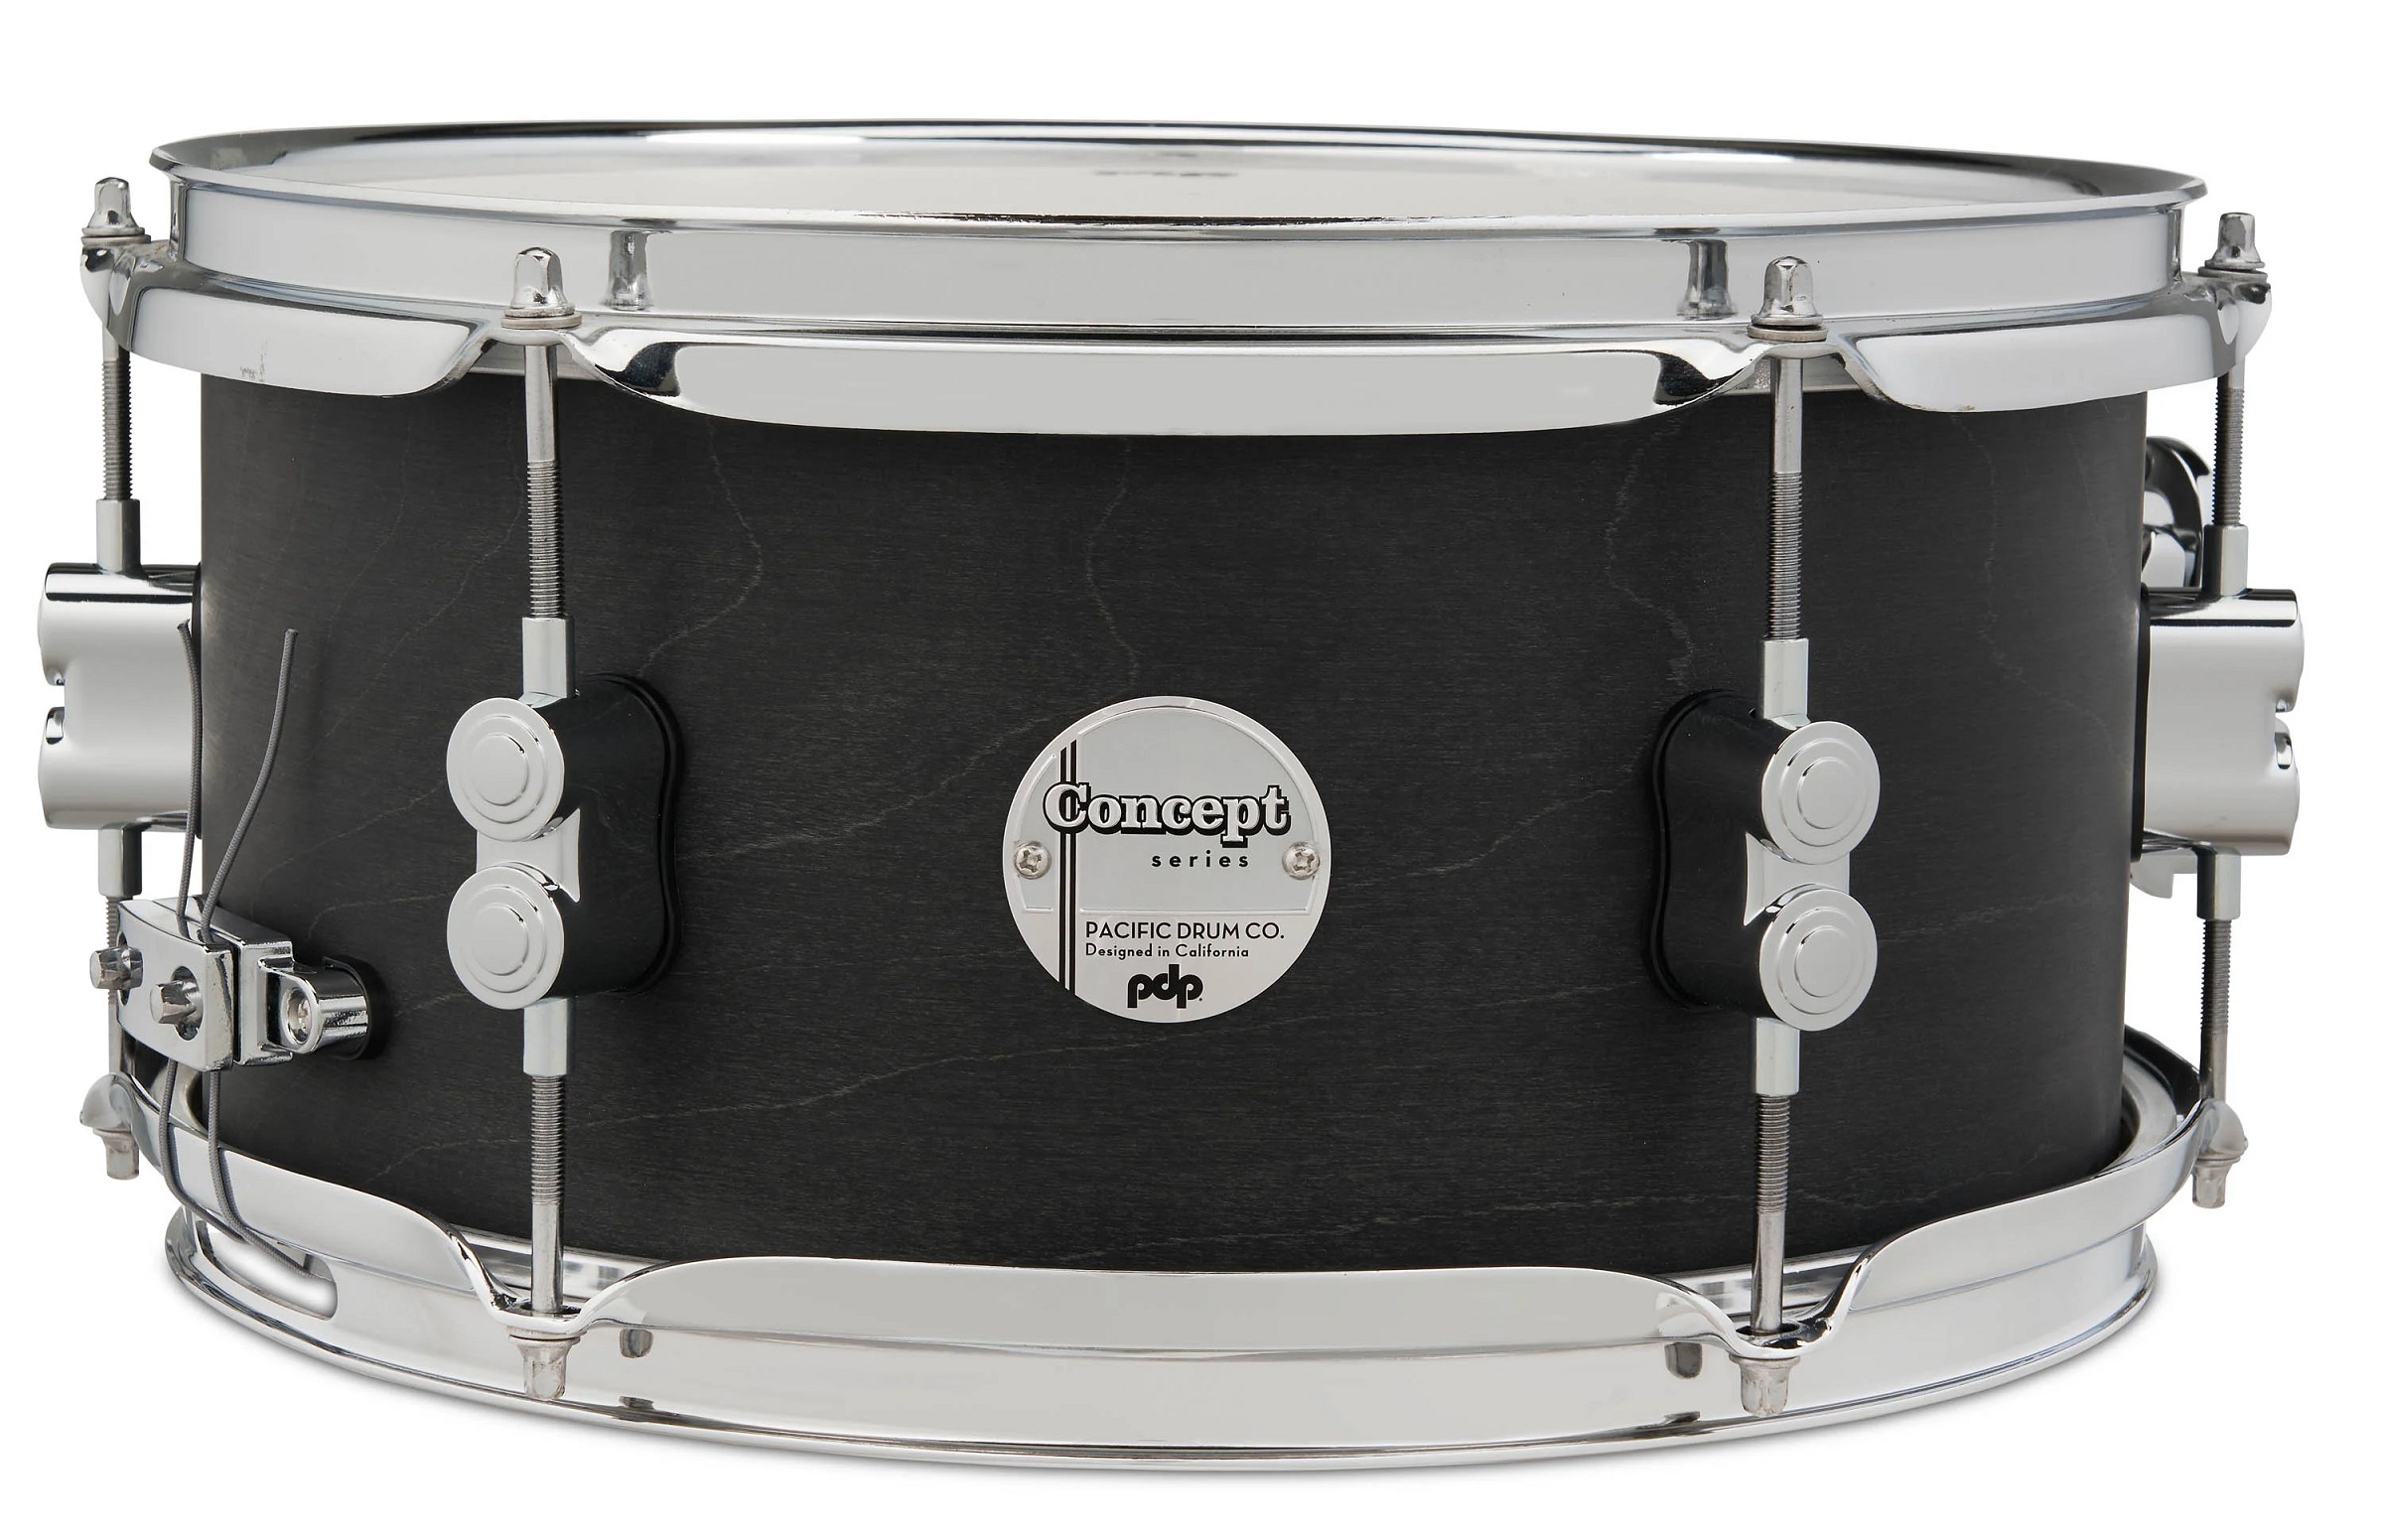 PDP Concept Black WAX Snare 12"x6"